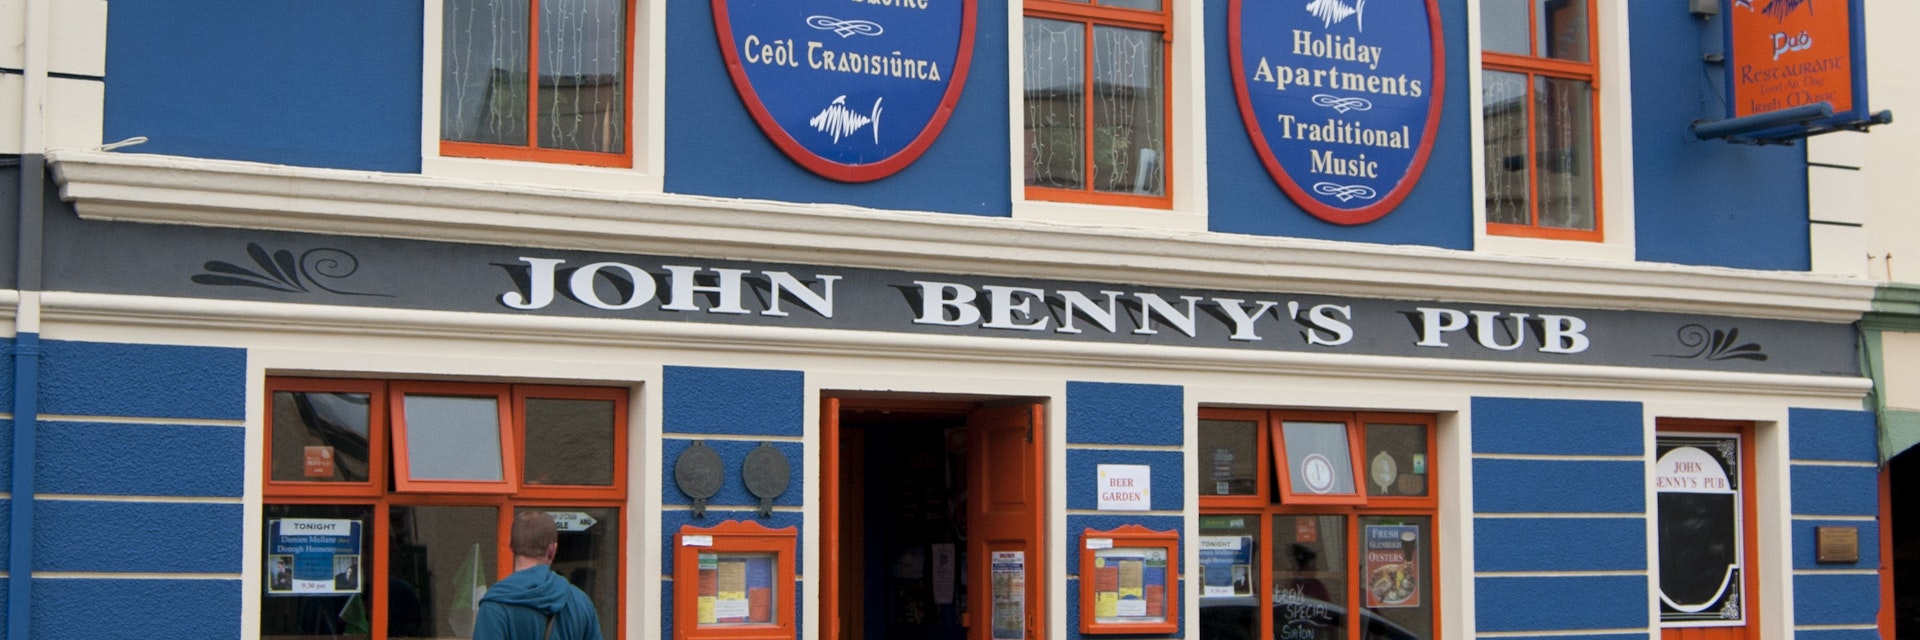 DINGLE, IRELAND - AUGUST 3, 2012 : frontage of the John Benny's pub on August 3, 2012 in Dingle, Ireland.; Shutterstock ID 213066355; Your name (First / Last): Josh Vogel; Project no. or GL code: 56530; Network activity no. or Cost Centre: Online-Design; Product or Project: 65050/7529/Josh Vogel/LP.com Destination Galleries